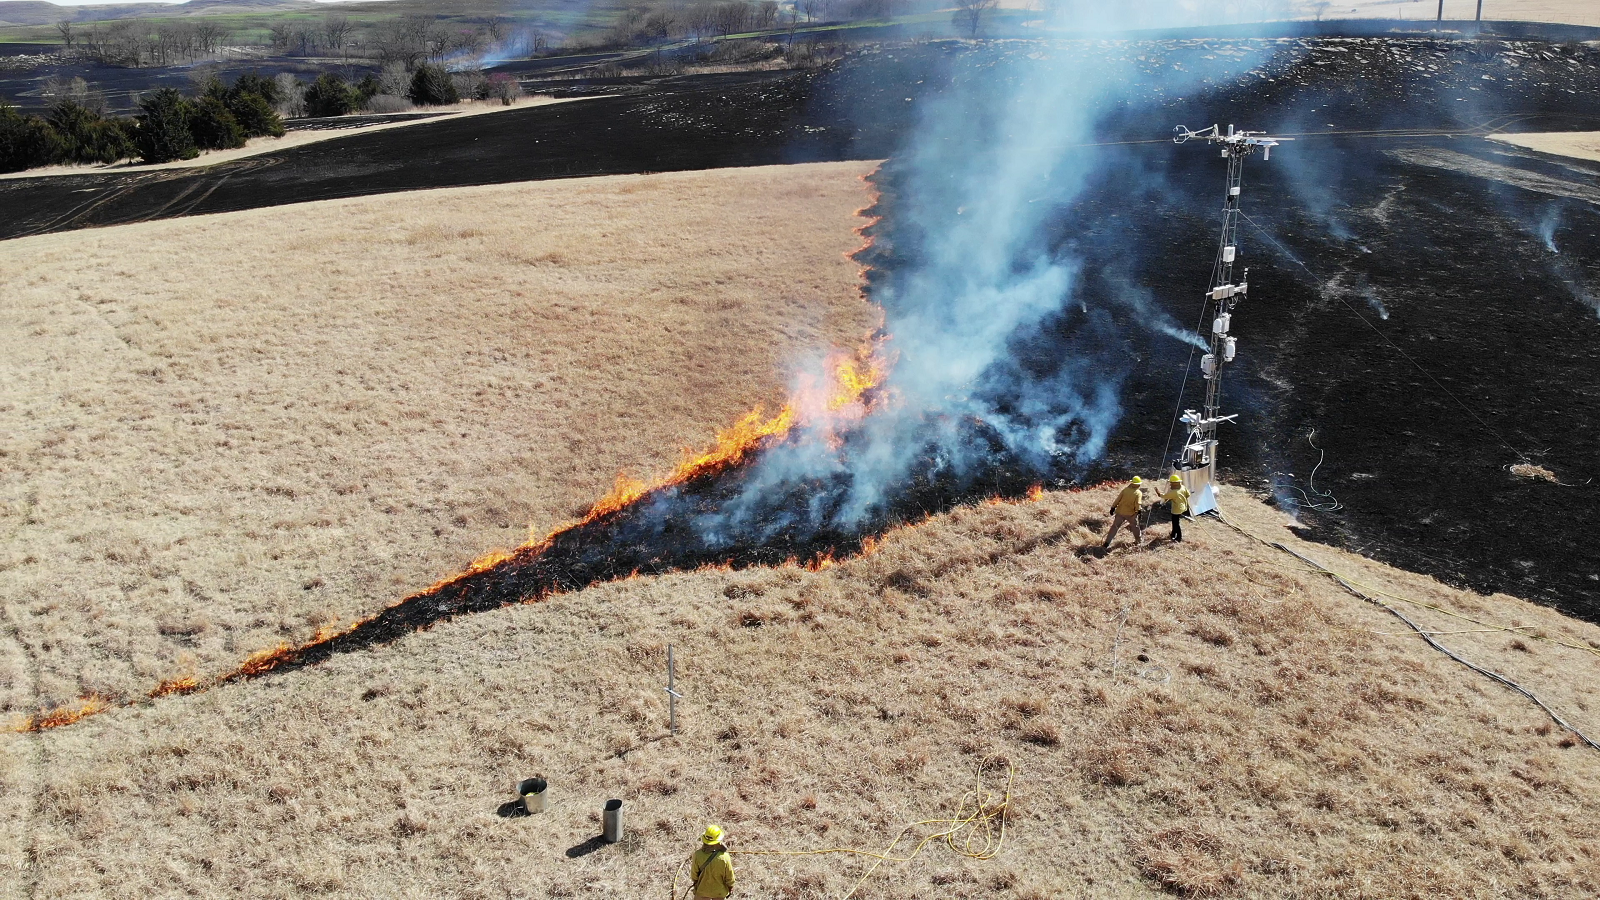 Yellow-jacketed figures putting out a fire. (Image by Rajesh Sankaran/Argonne National Laboratory.)